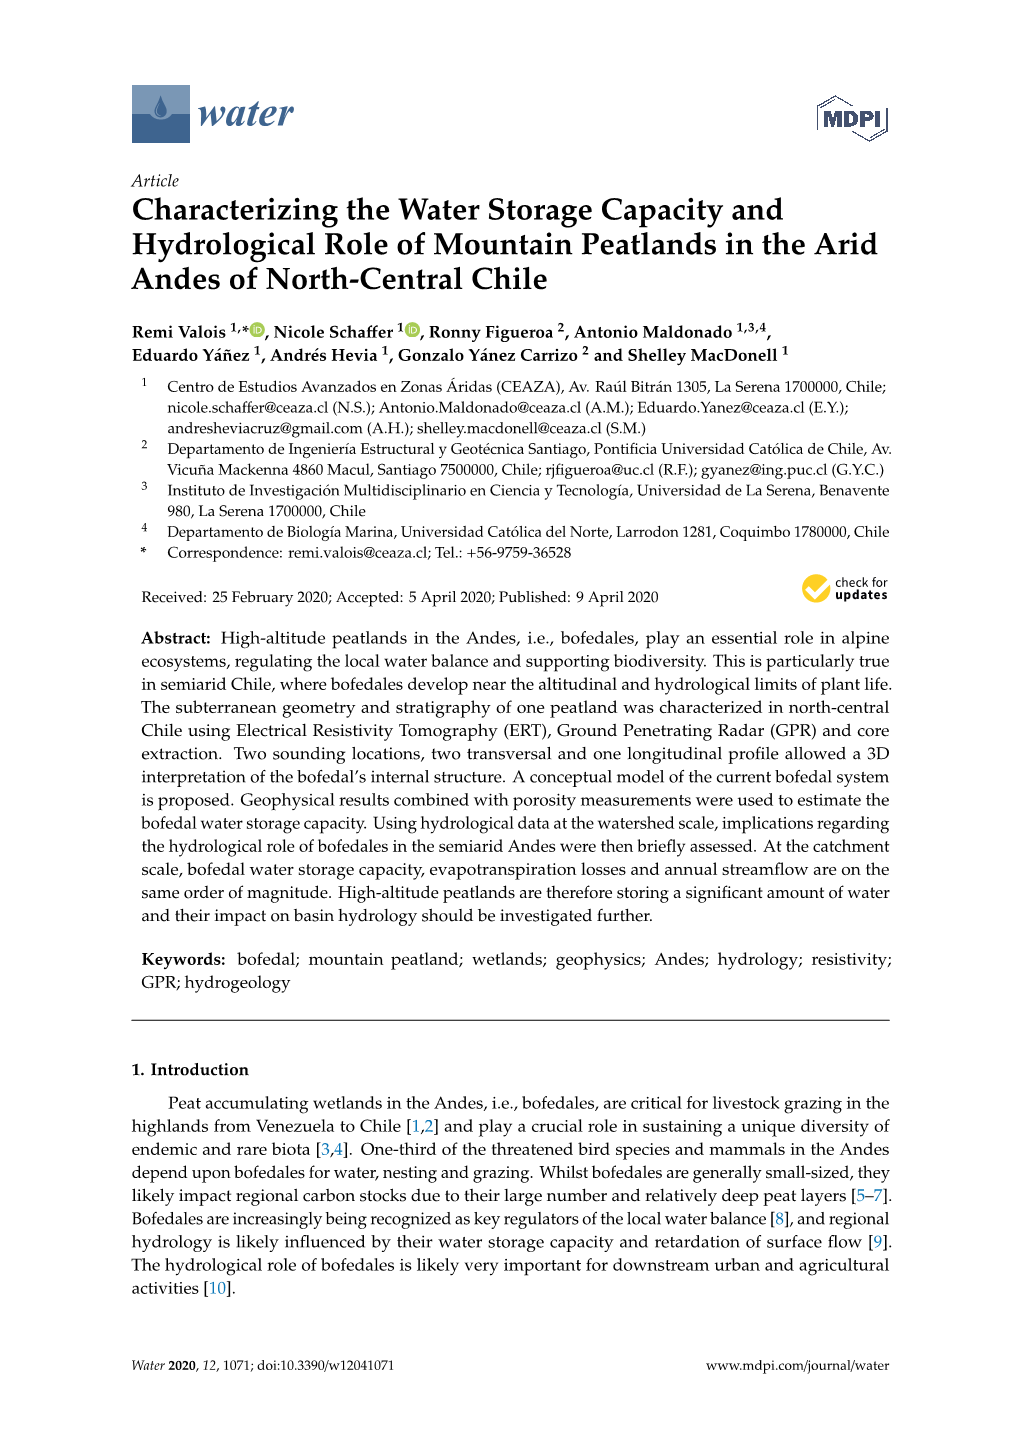 Characterizing the Water Storage Capacity and Hydrological Role of Mountain Peatlands in the Arid Andes of North-Central Chile